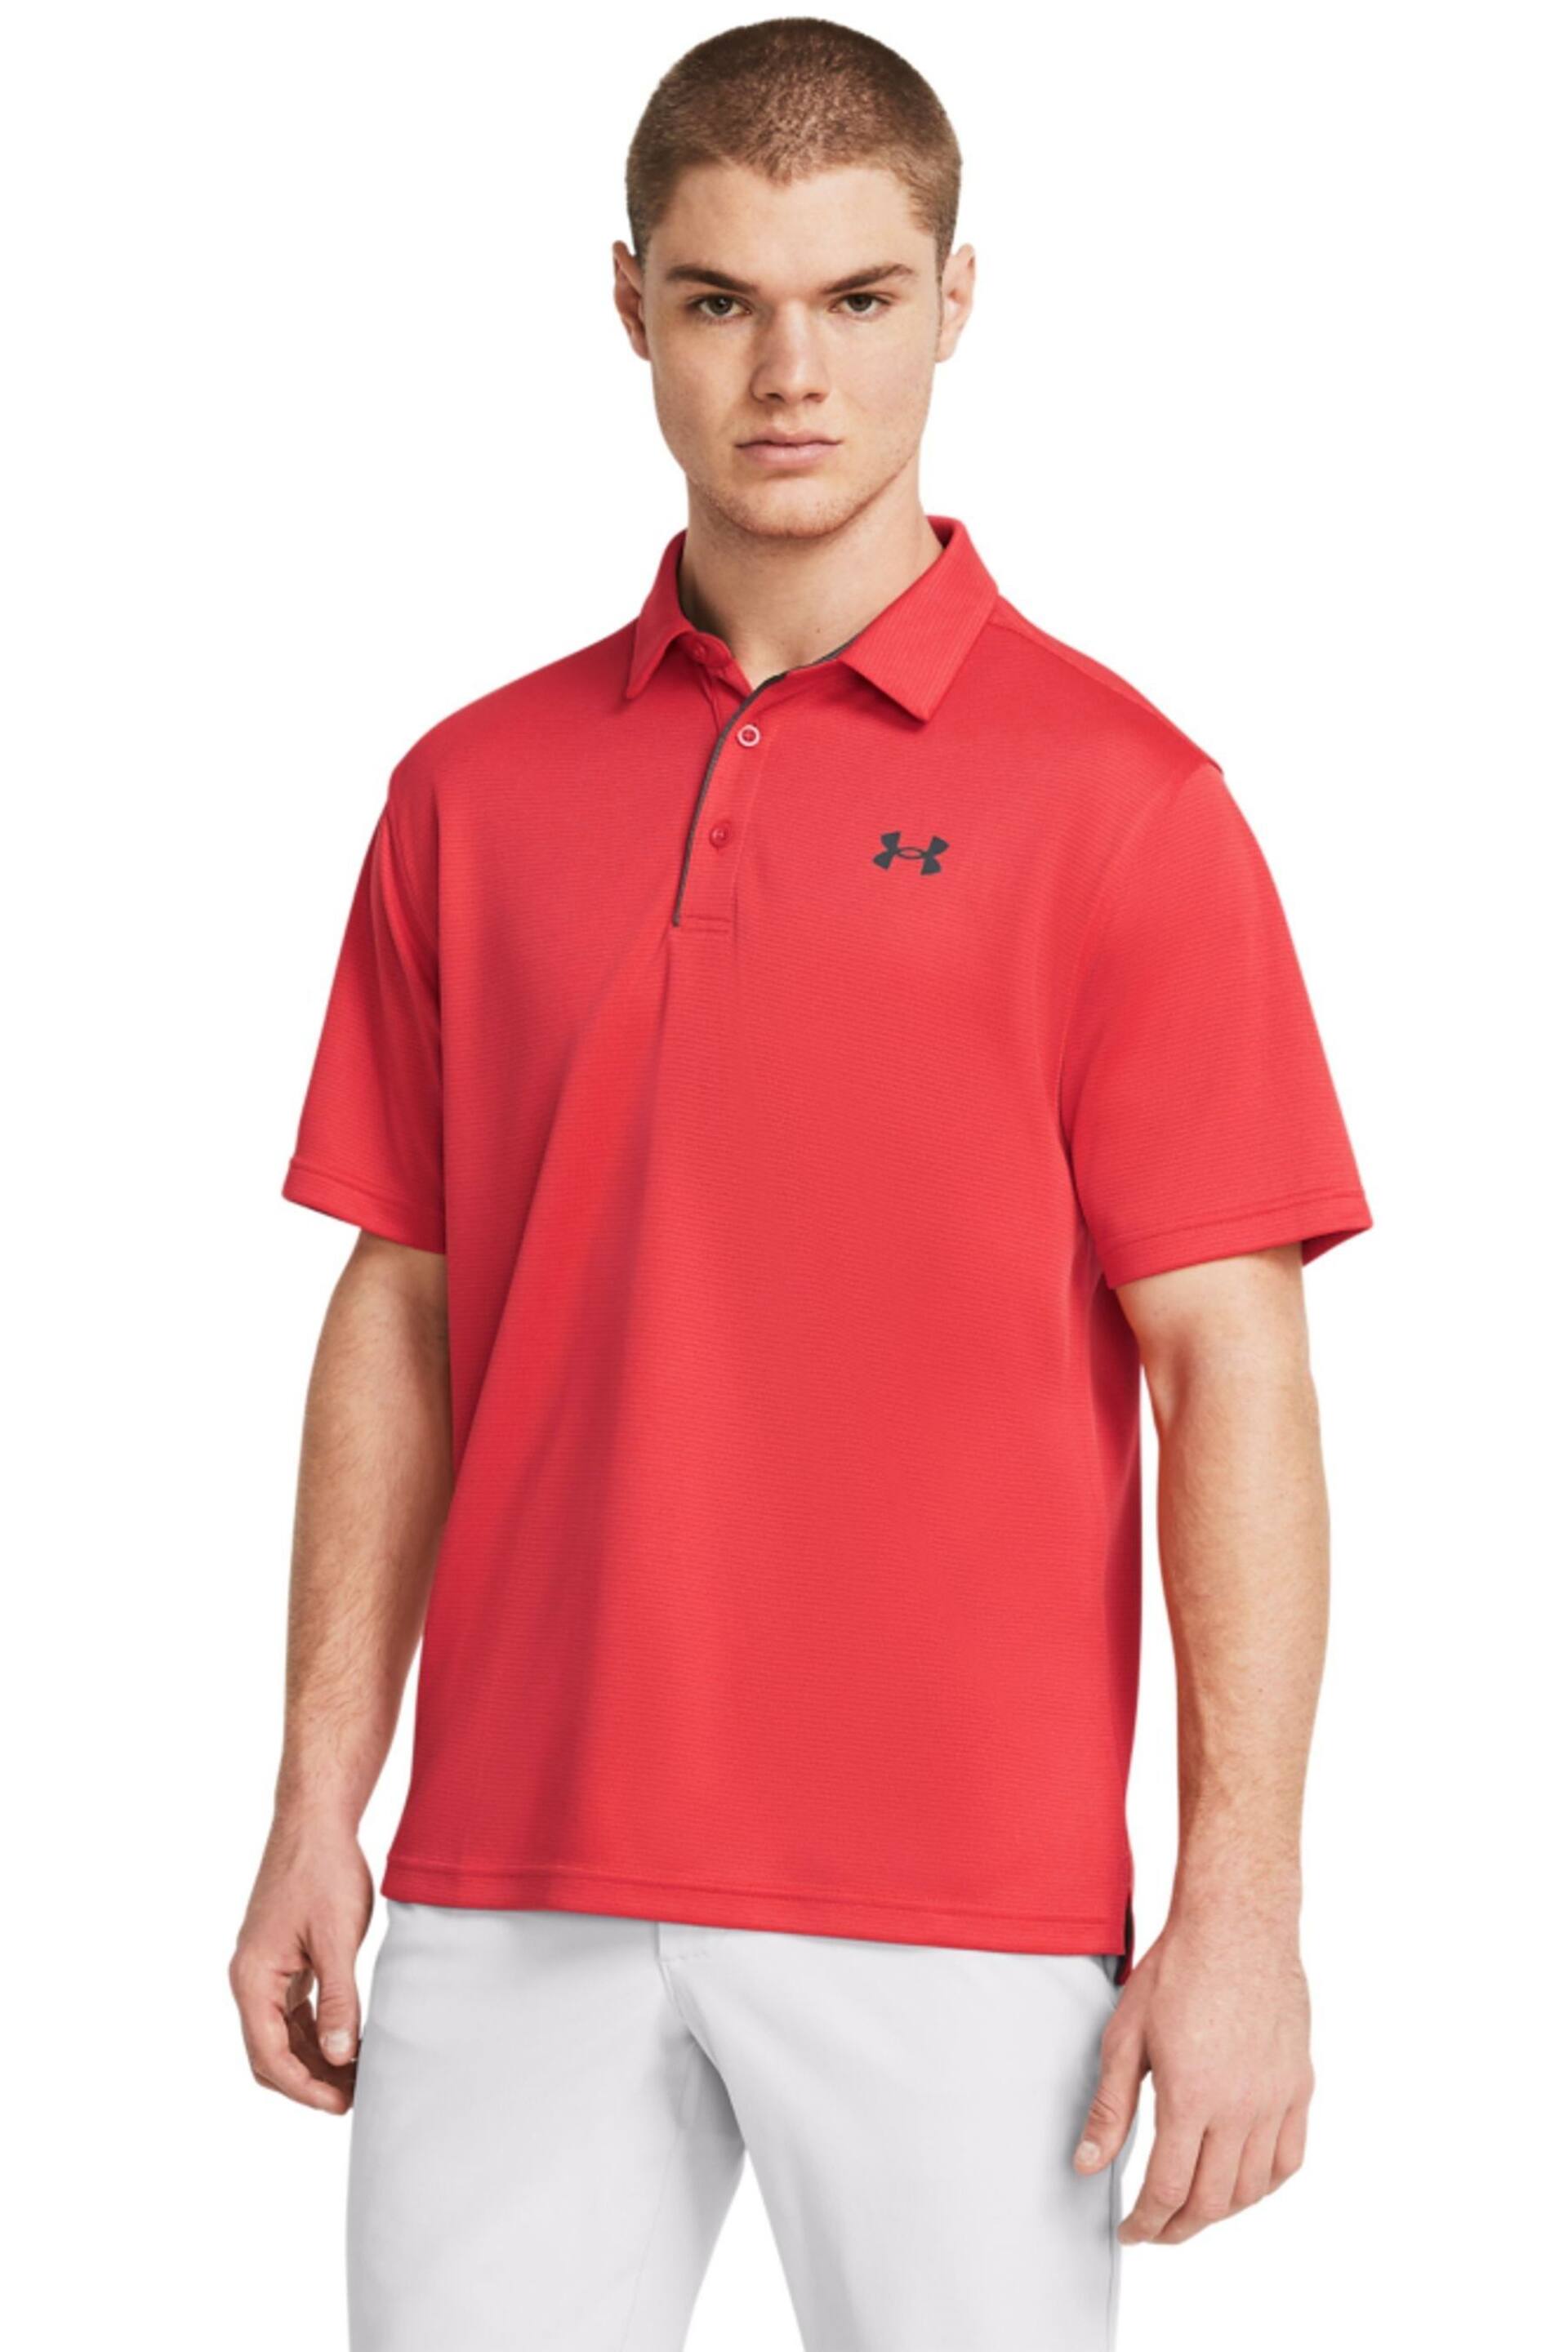 Under Armour Red/Grey Navy/Golf Tech Polo Shirt - Image 1 of 5